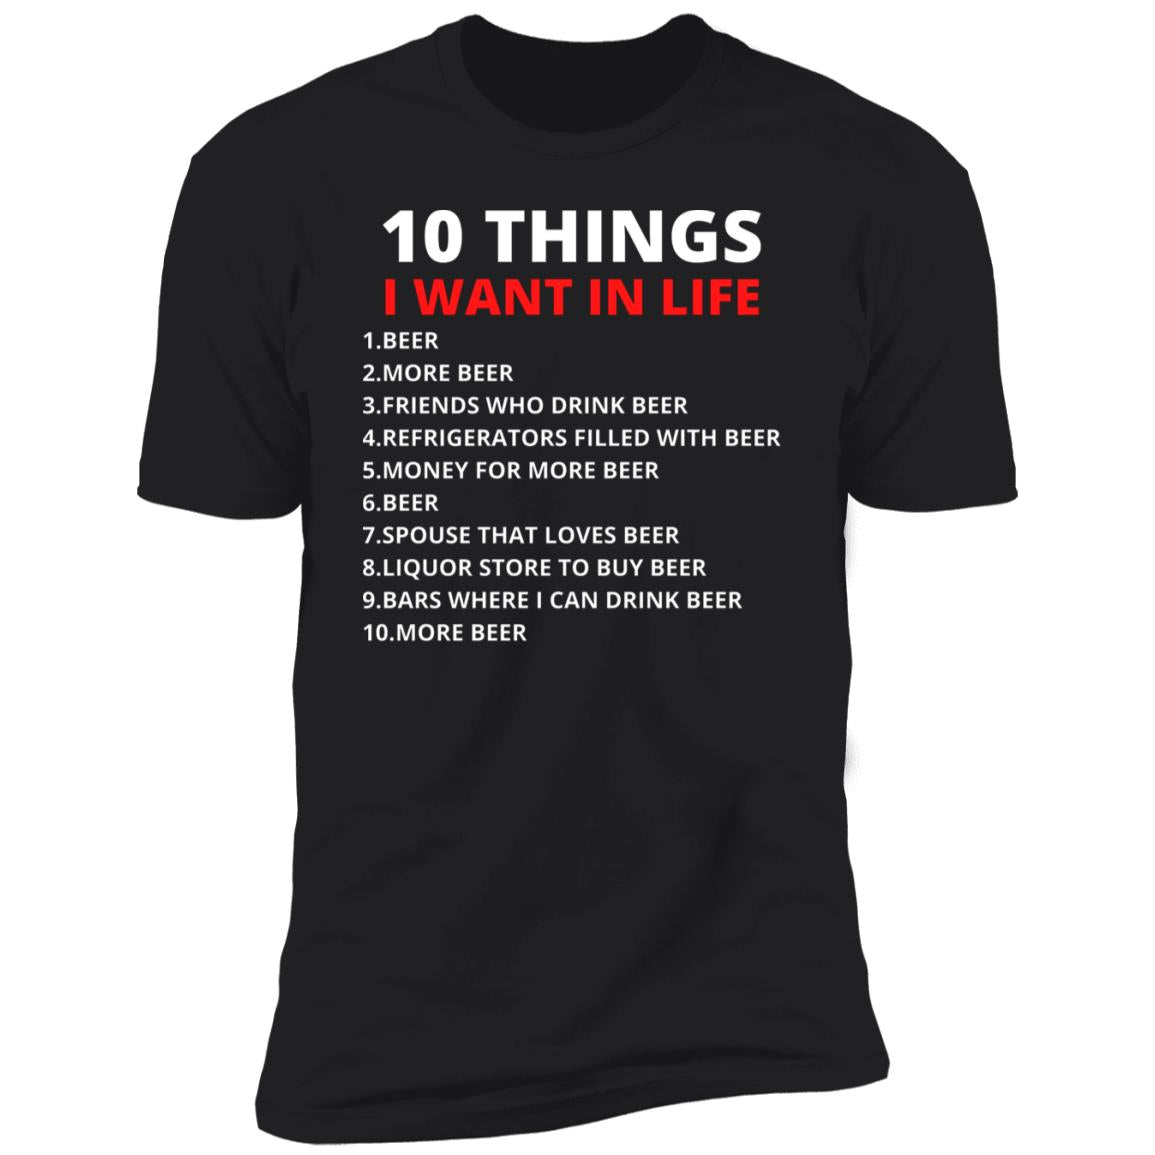 Funny BEER shirt, 10 Things I want Tee, Funny Drunk shirt, Beer Drinking shirt, Beer Humor T-shirt, Bar shirt, Beer Lover Alcohol tshirt